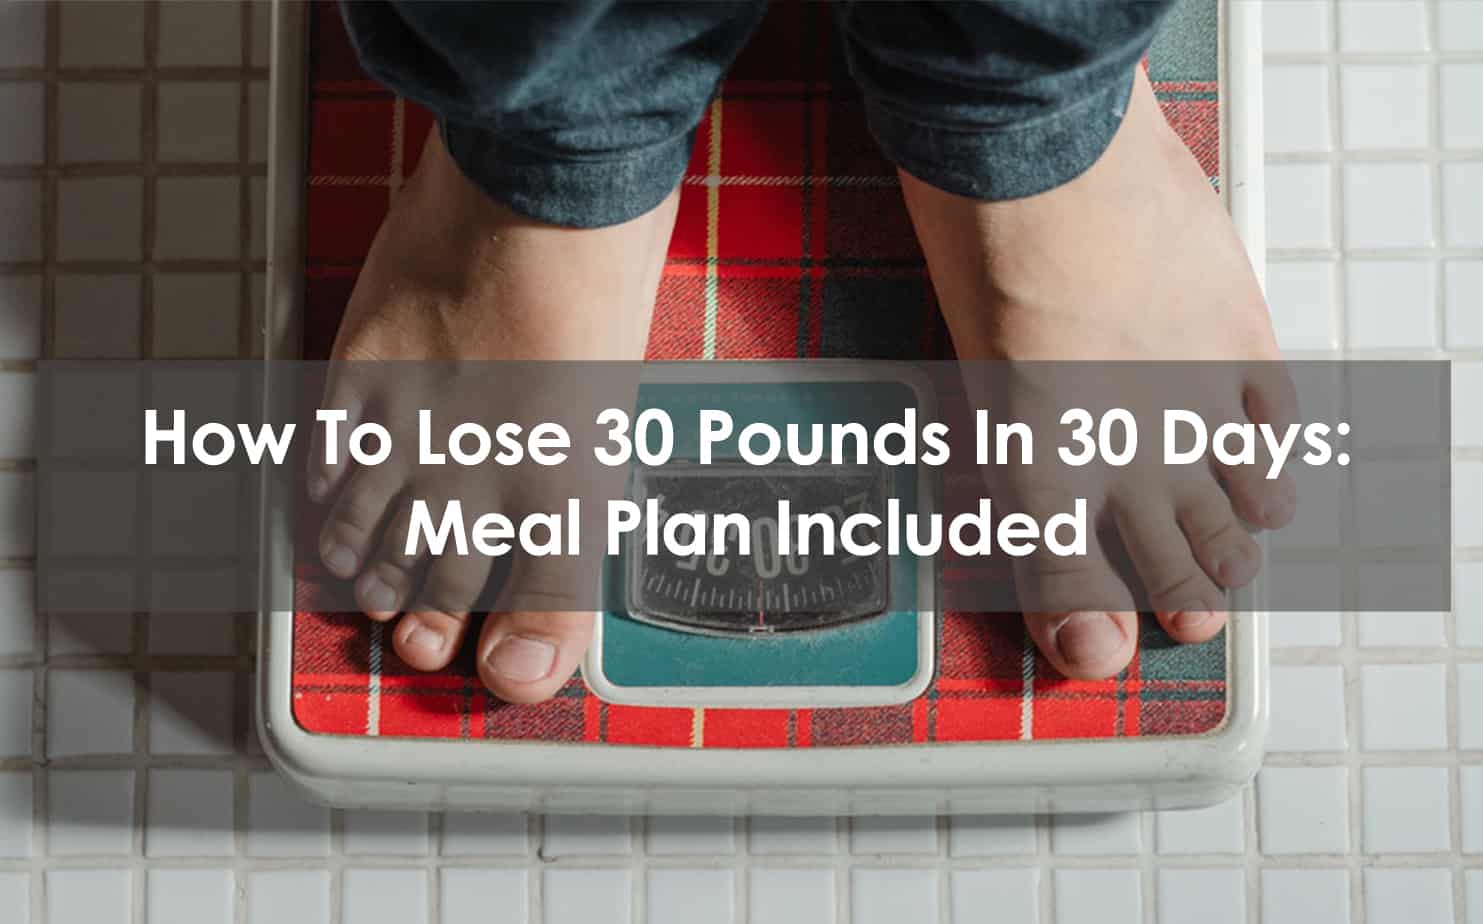 How To Lose 30 Pounds In 30 Days: Meal Plan Included